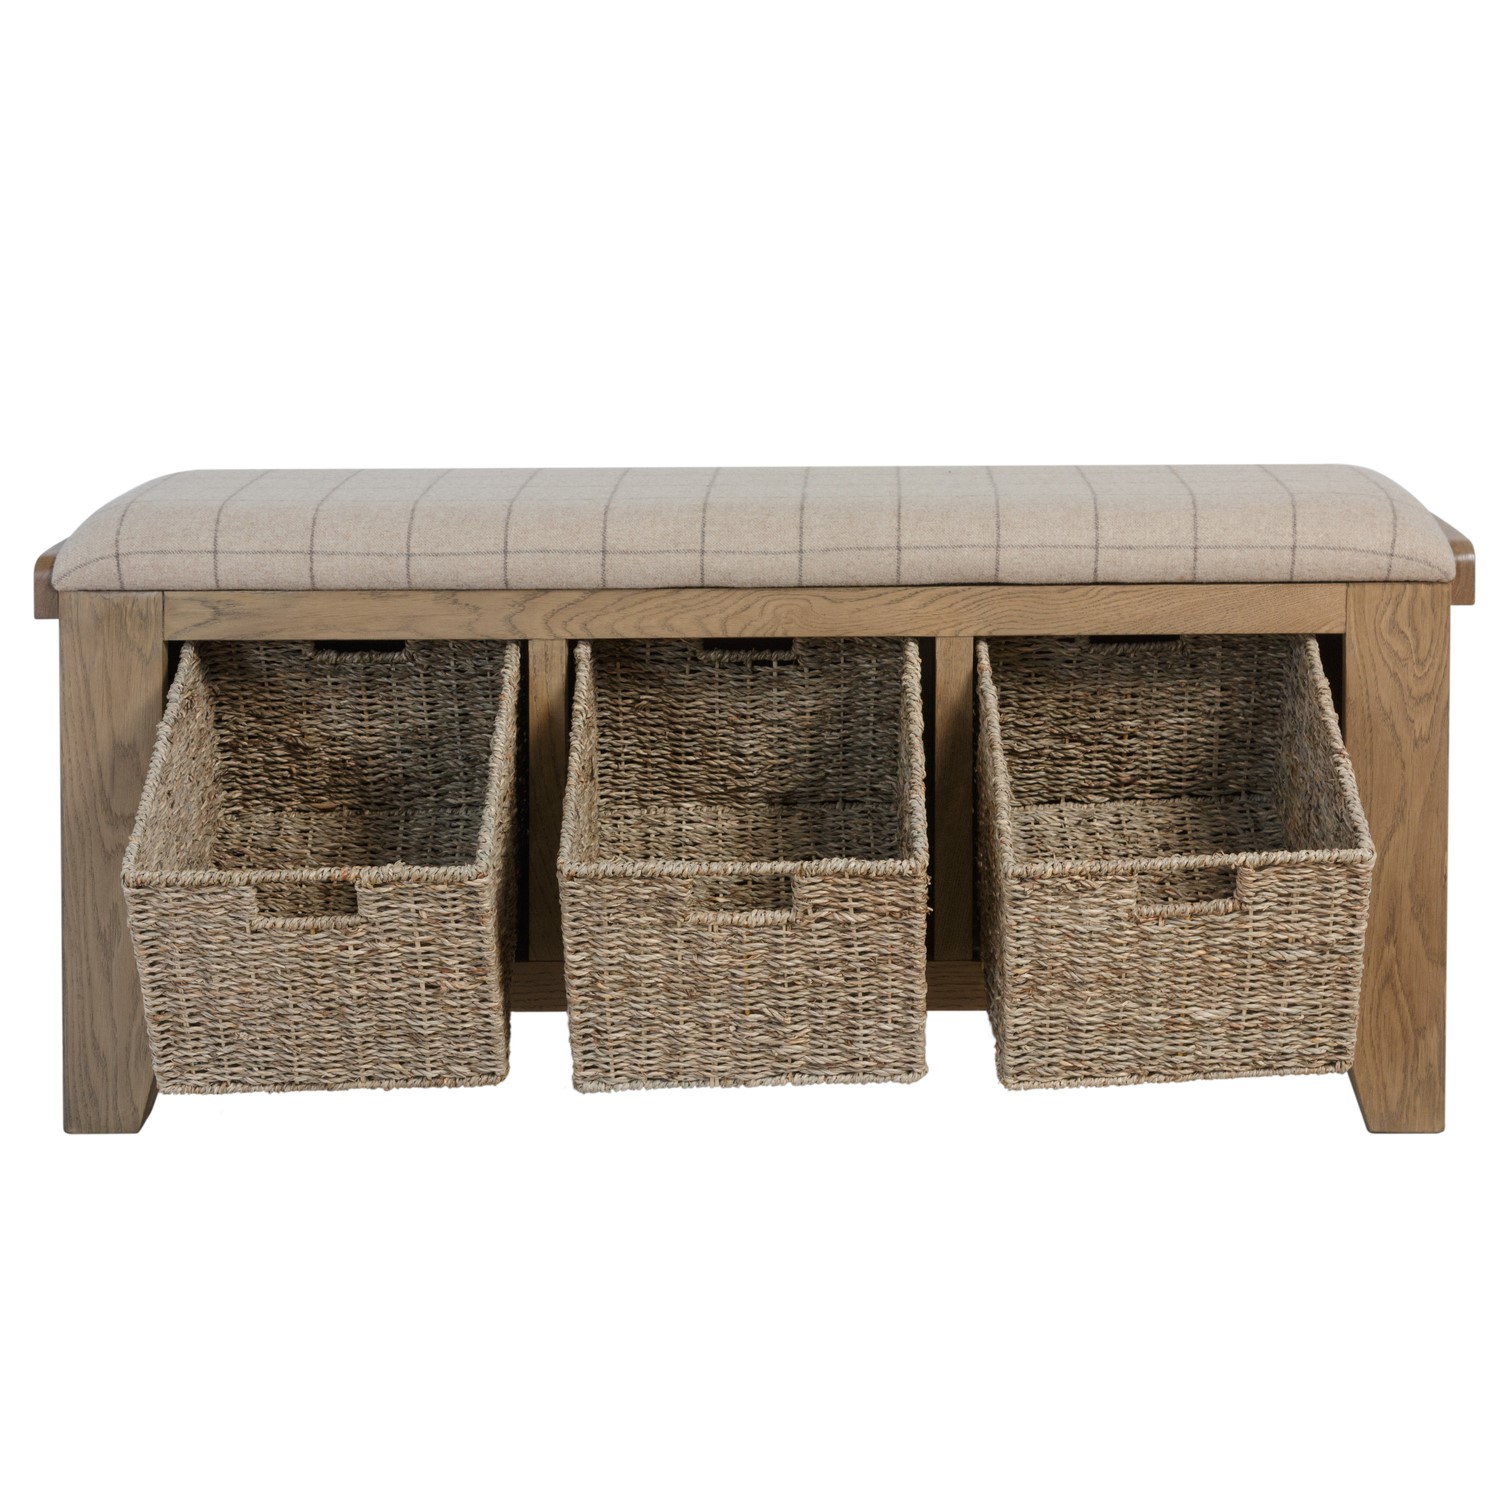 Read more about Smoked oak hall bench with wicker baskets